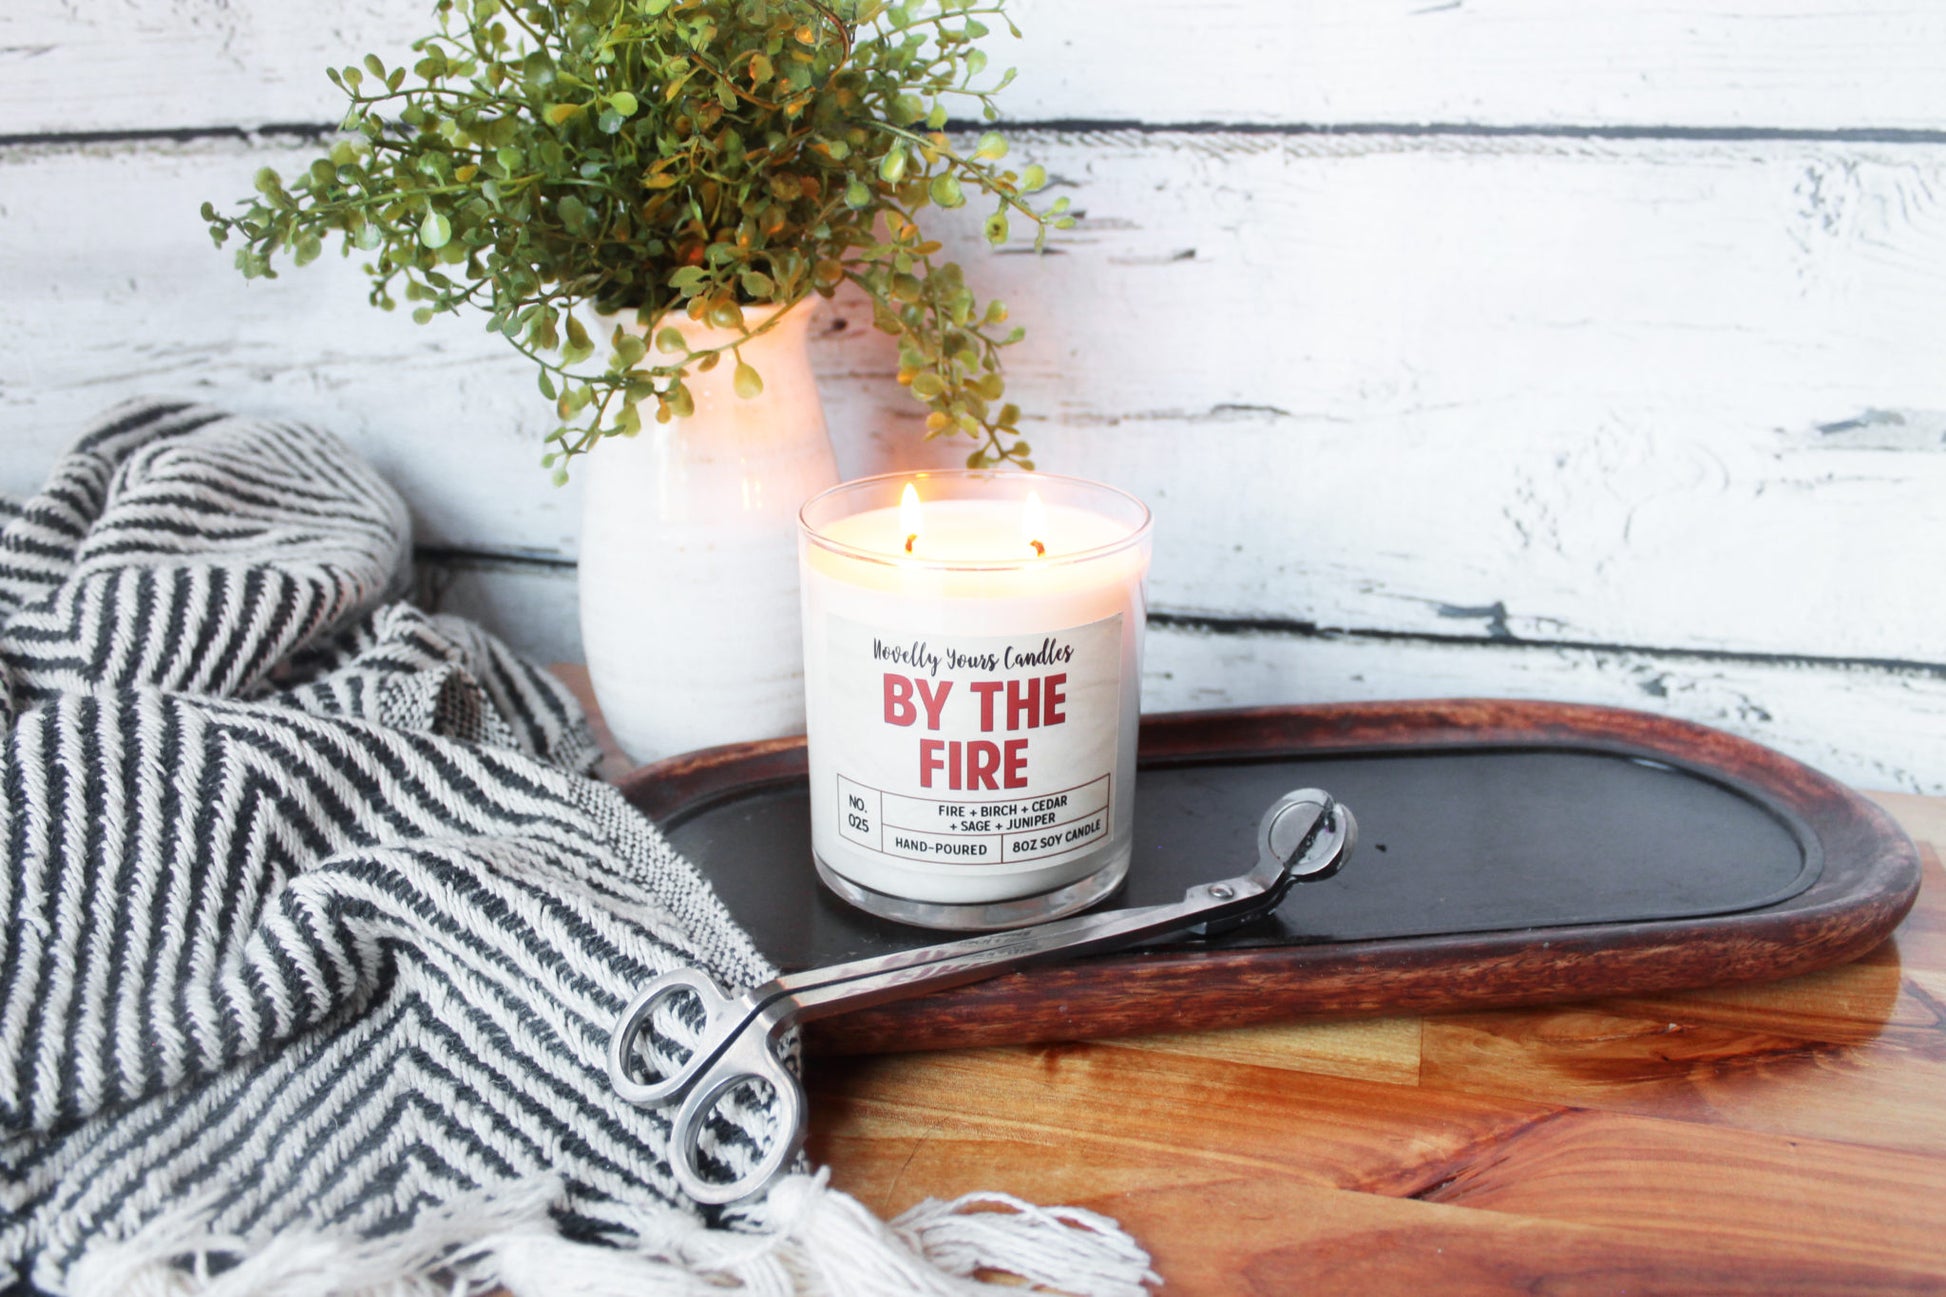 By the Fire · woodsy bonfire outdoor scented soy wax candle